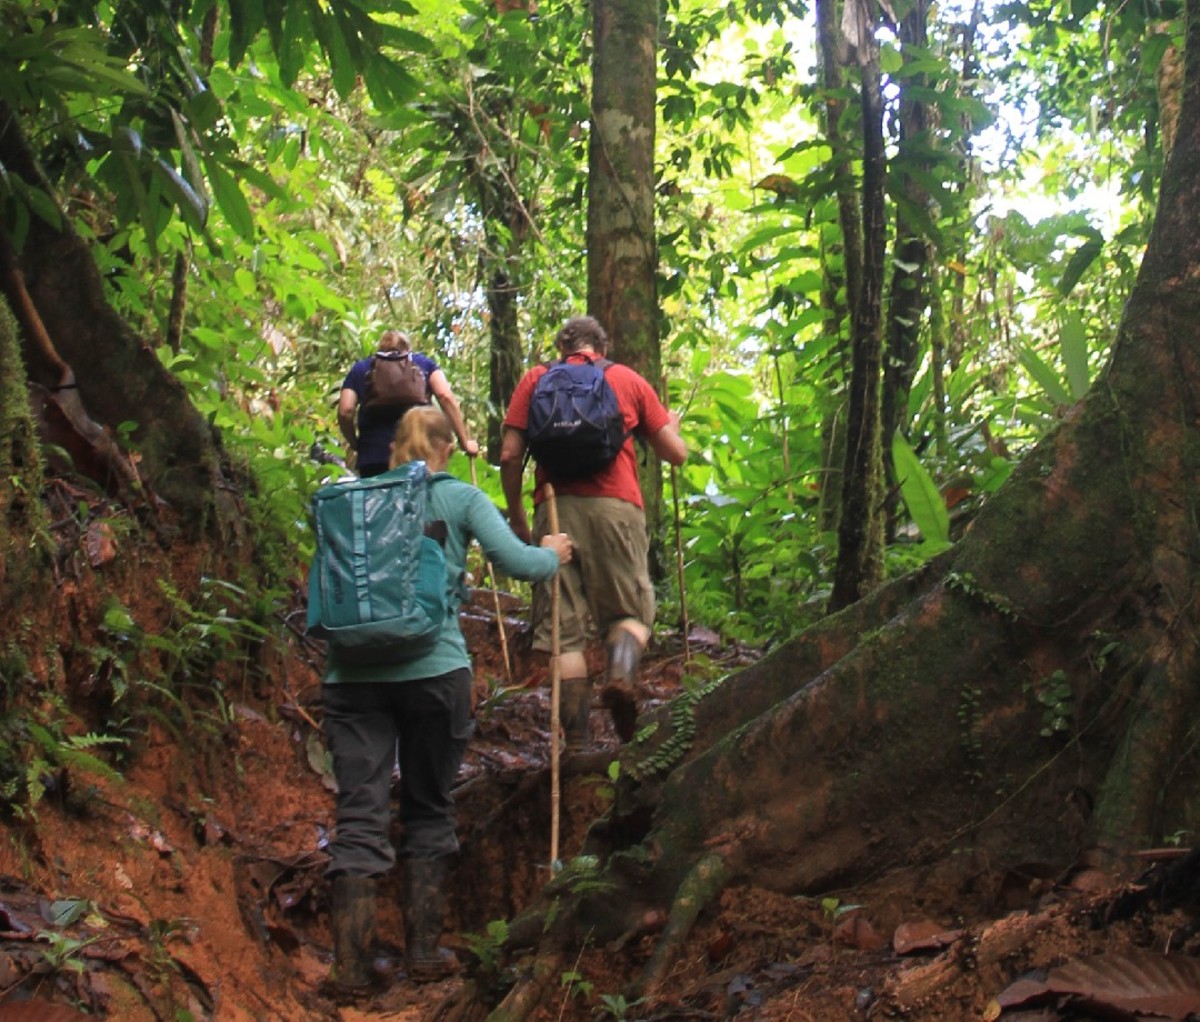 Hikers heading up a hilly trail under a lush canopy in Corcovado National Park.